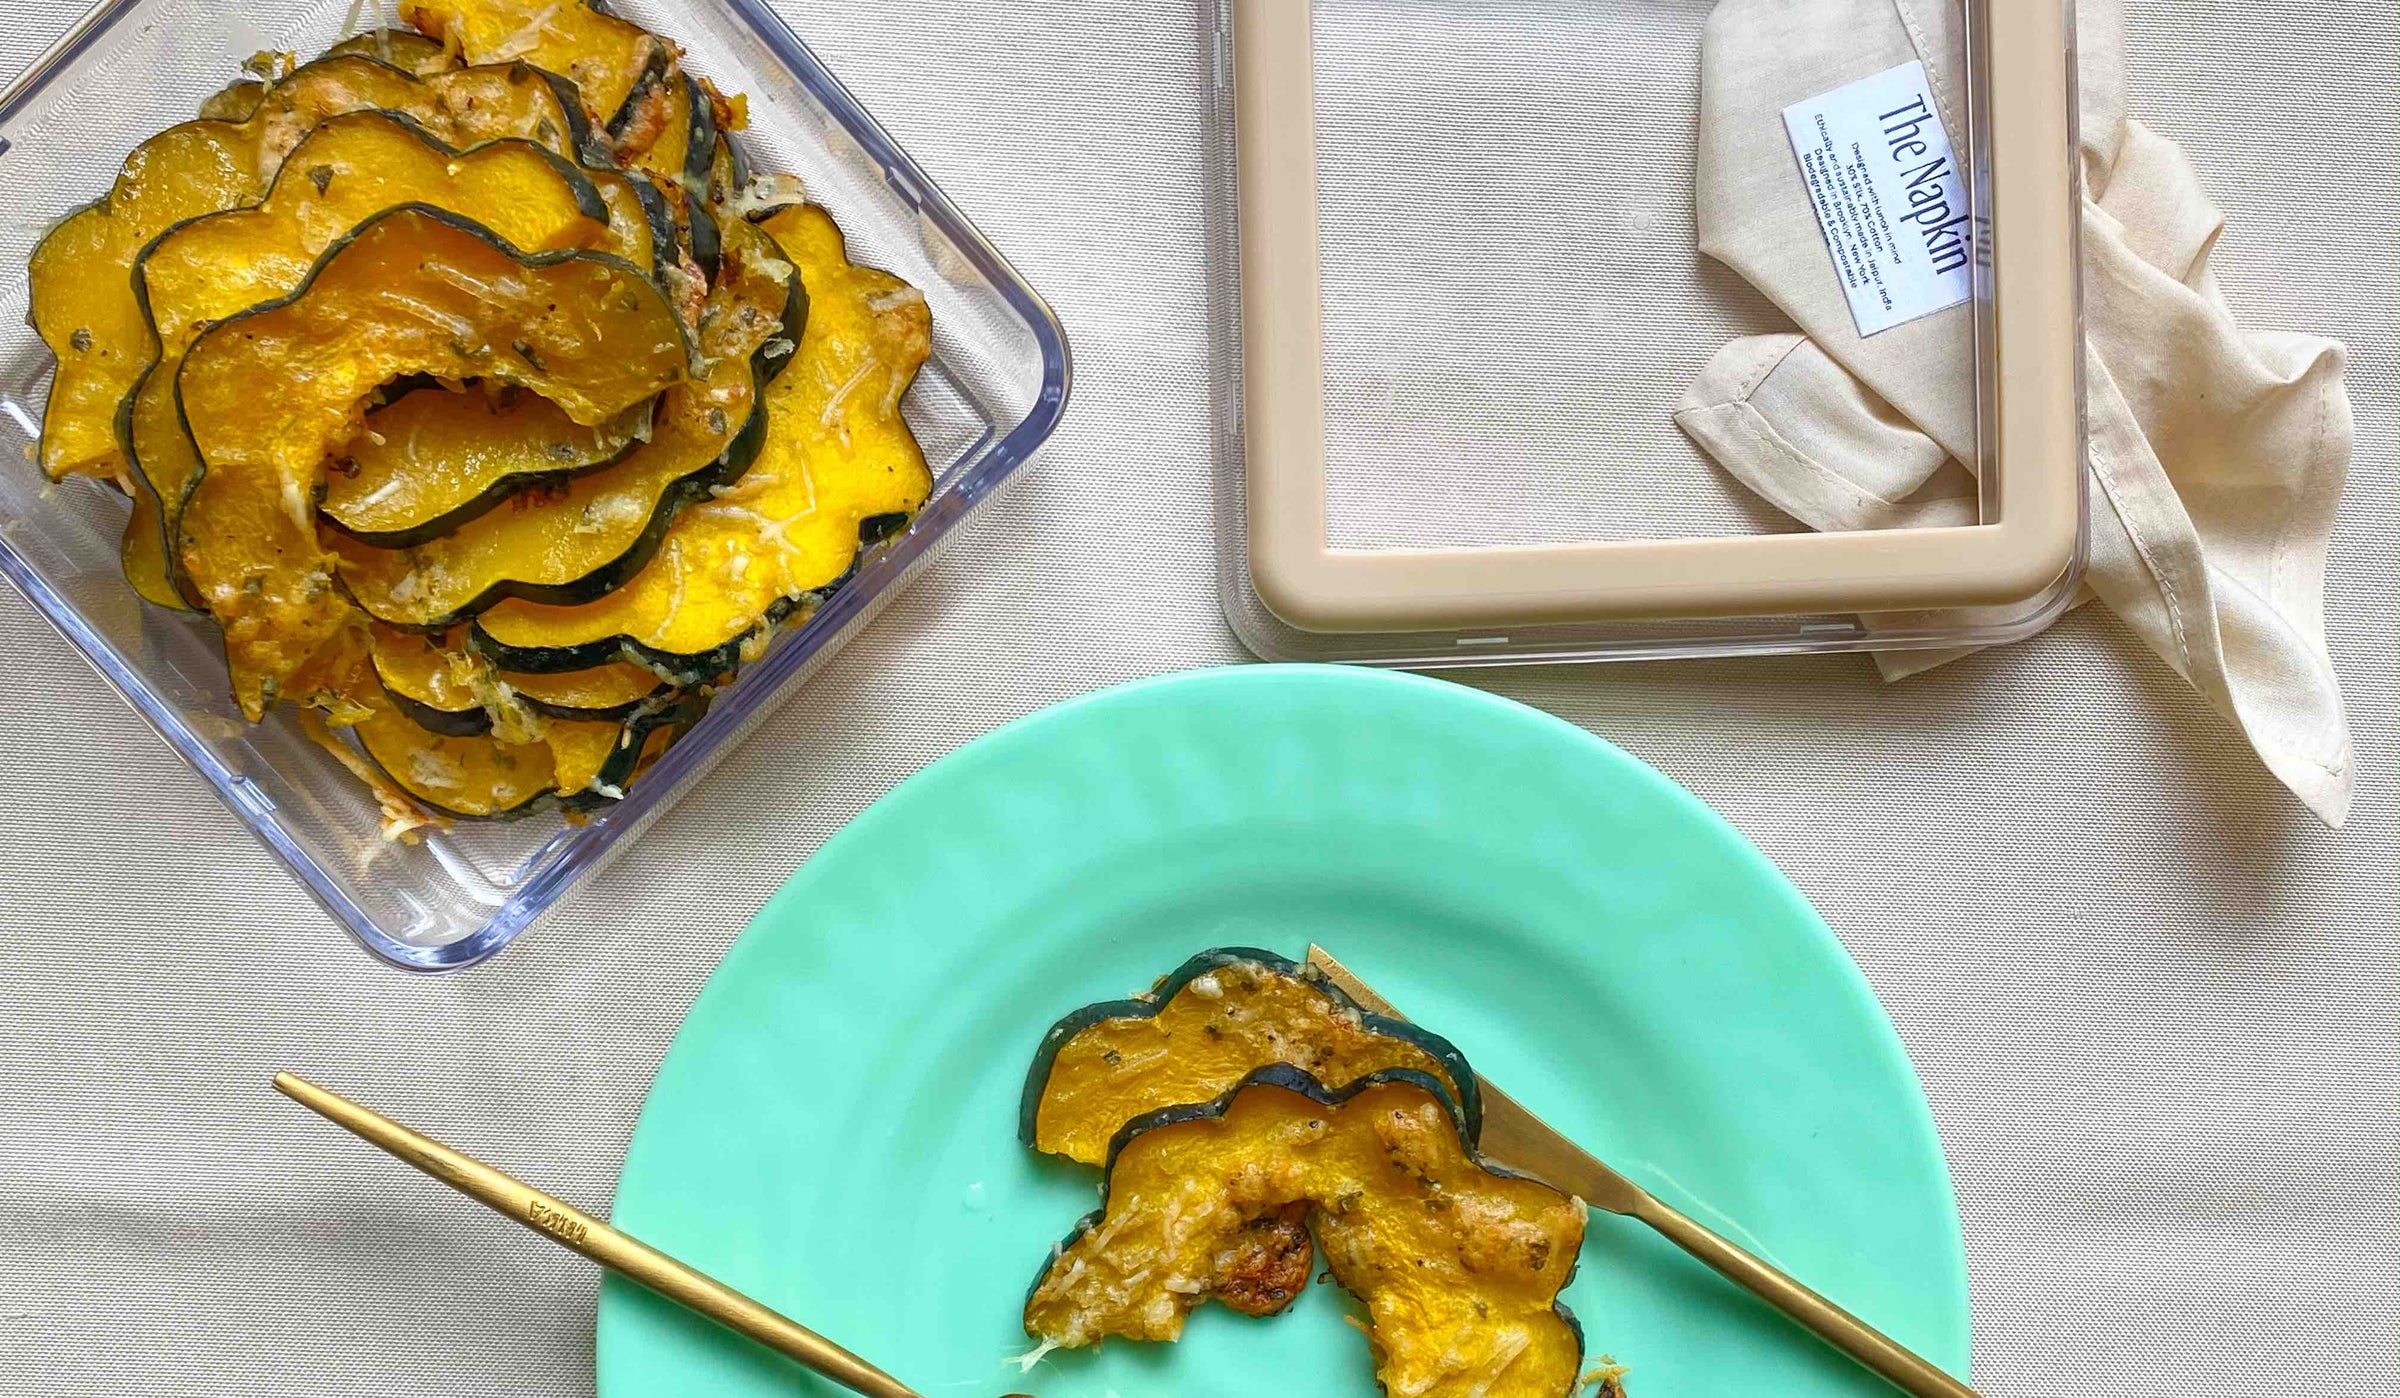 Roasted Squash with Herbs & Garlic